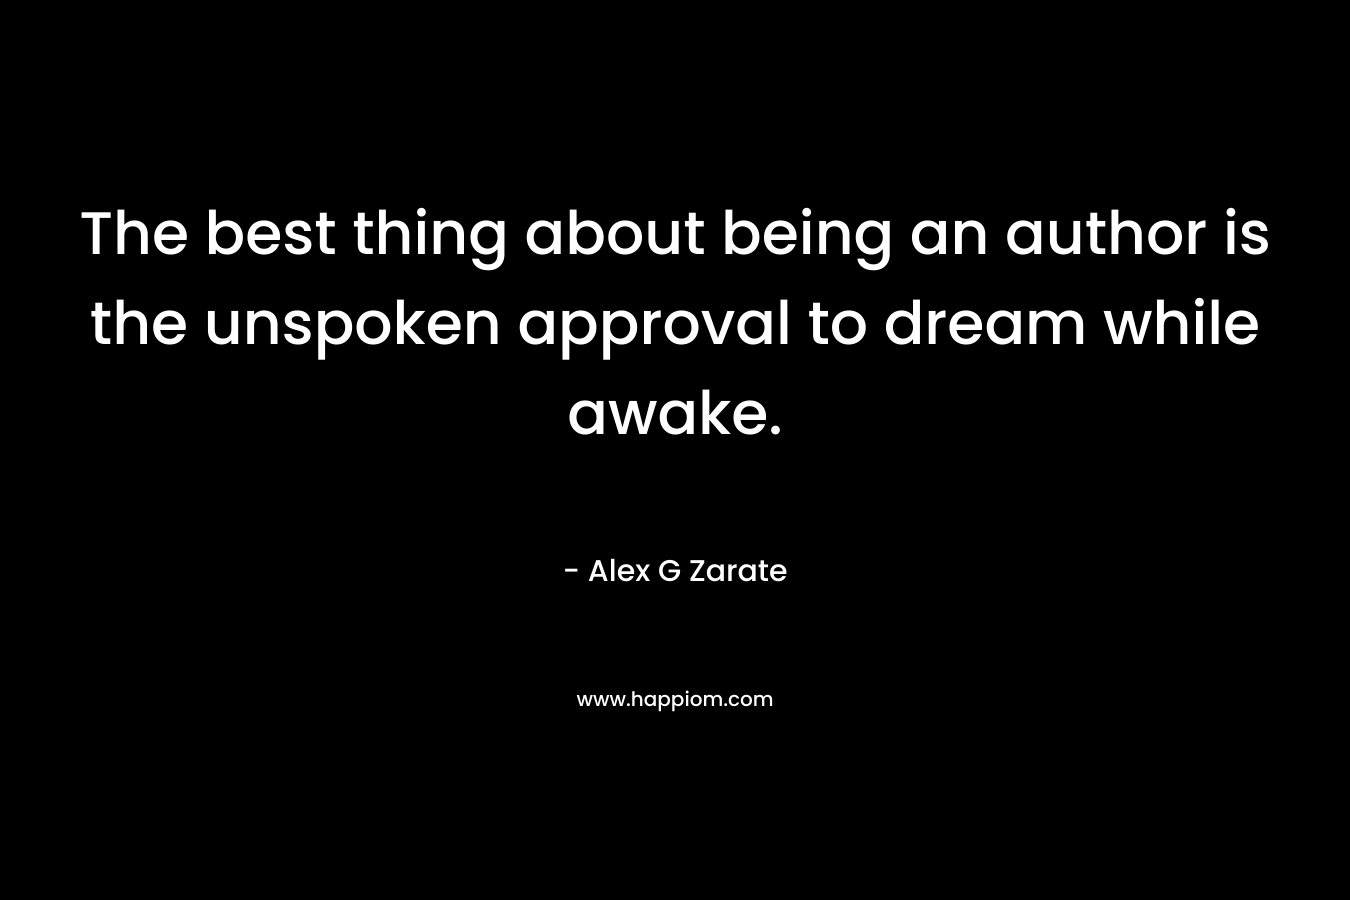 The best thing about being an author is the unspoken approval to dream while awake. – Alex G Zarate